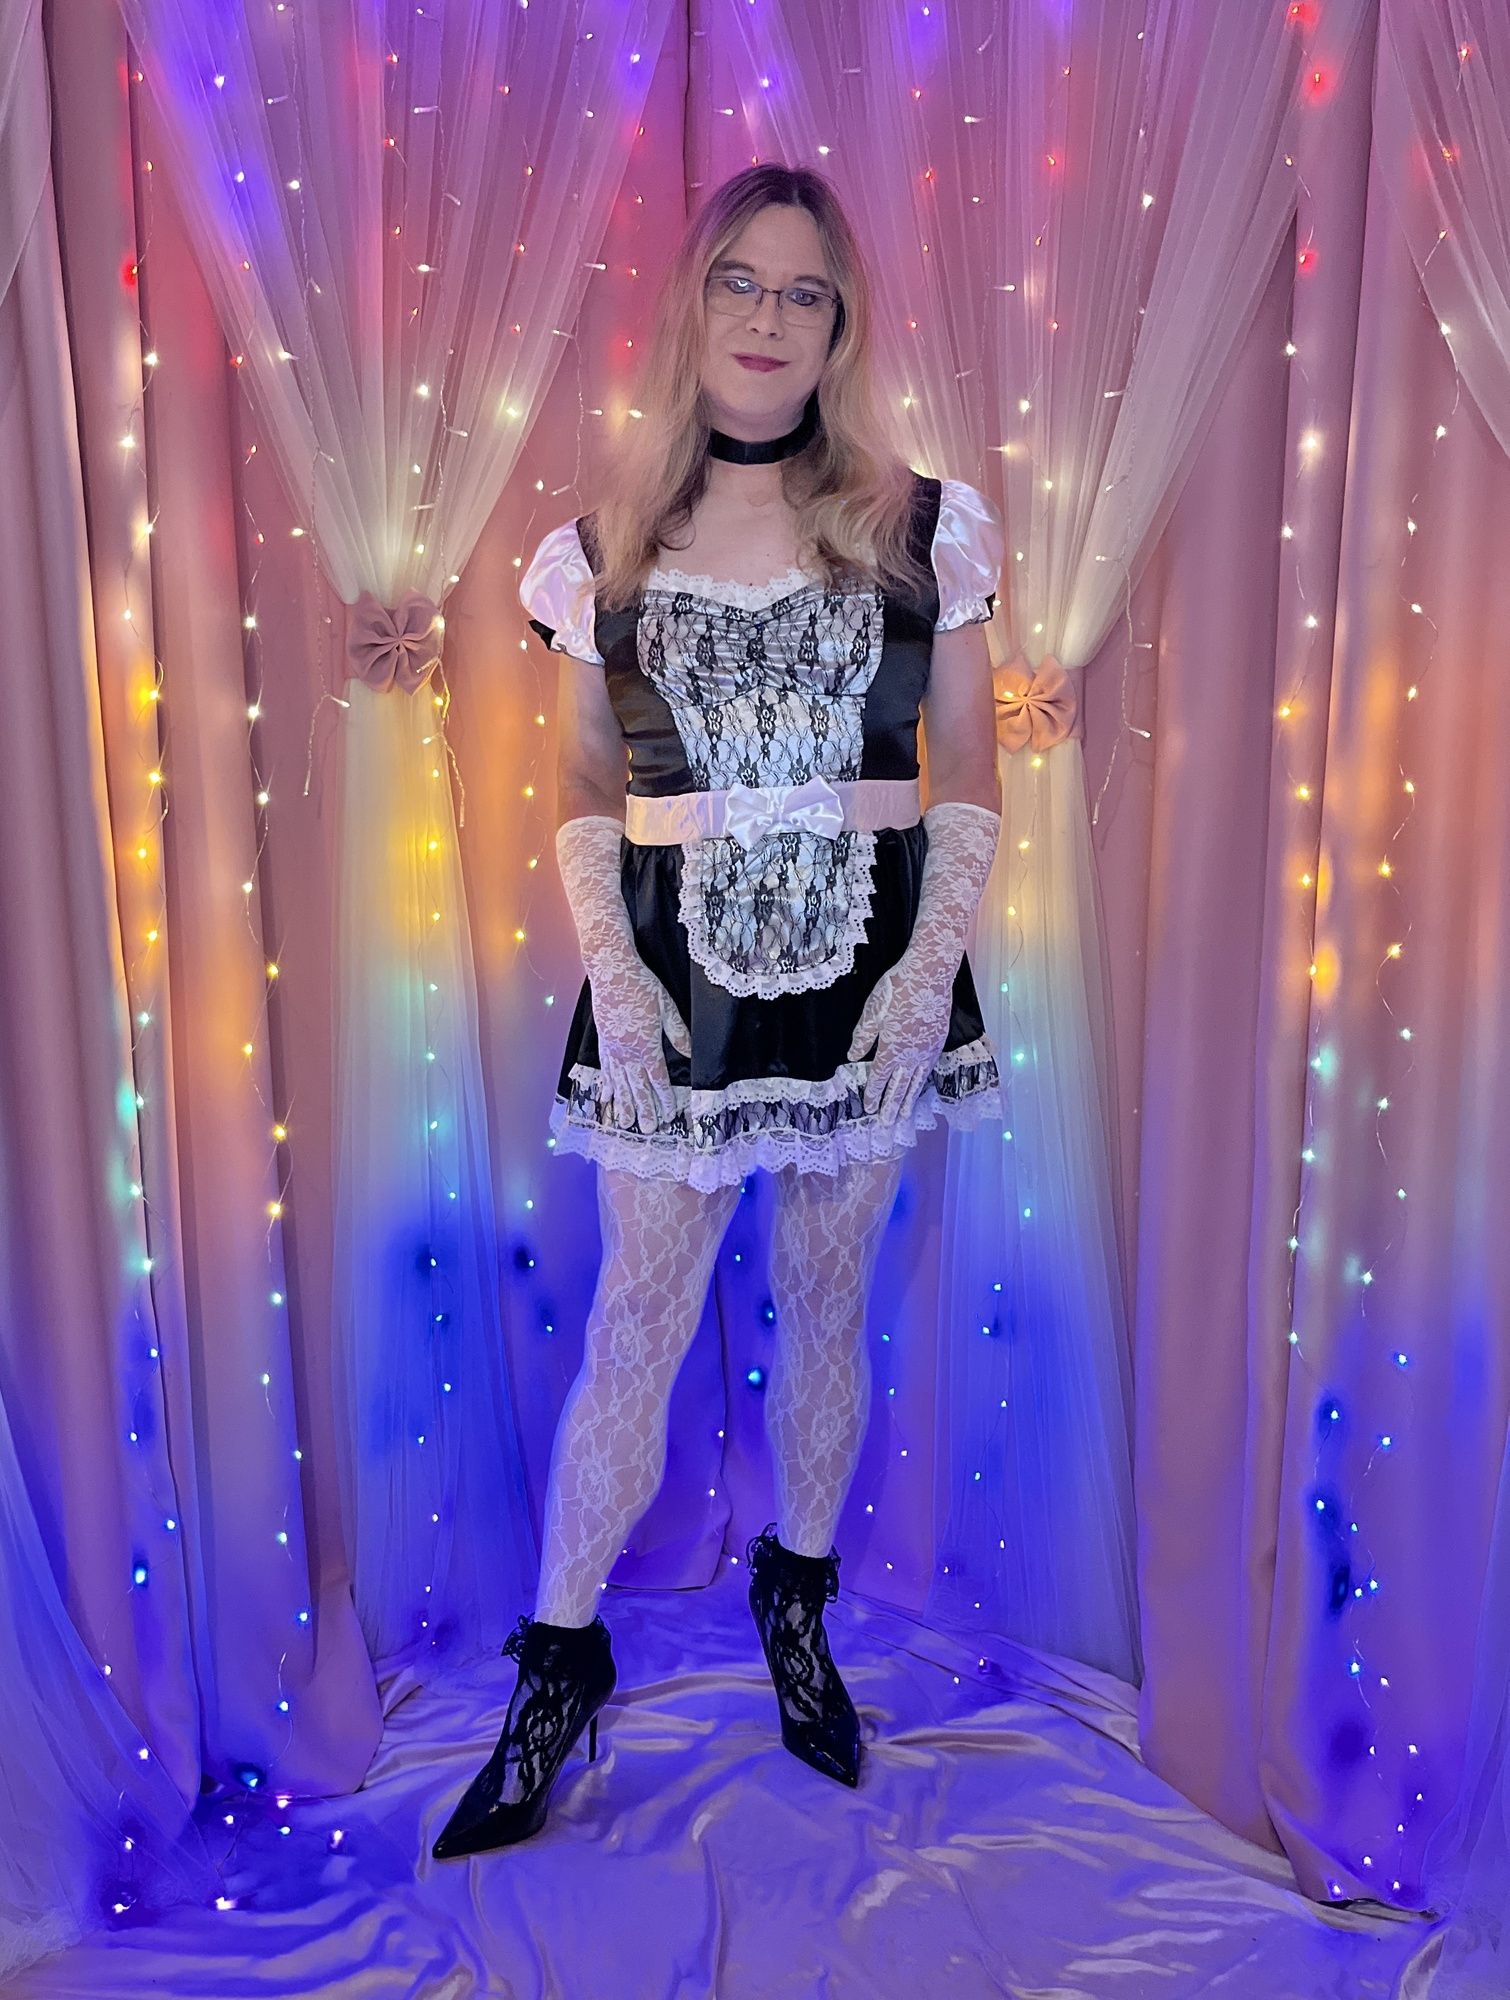 Joanie - Maid In Lace #3